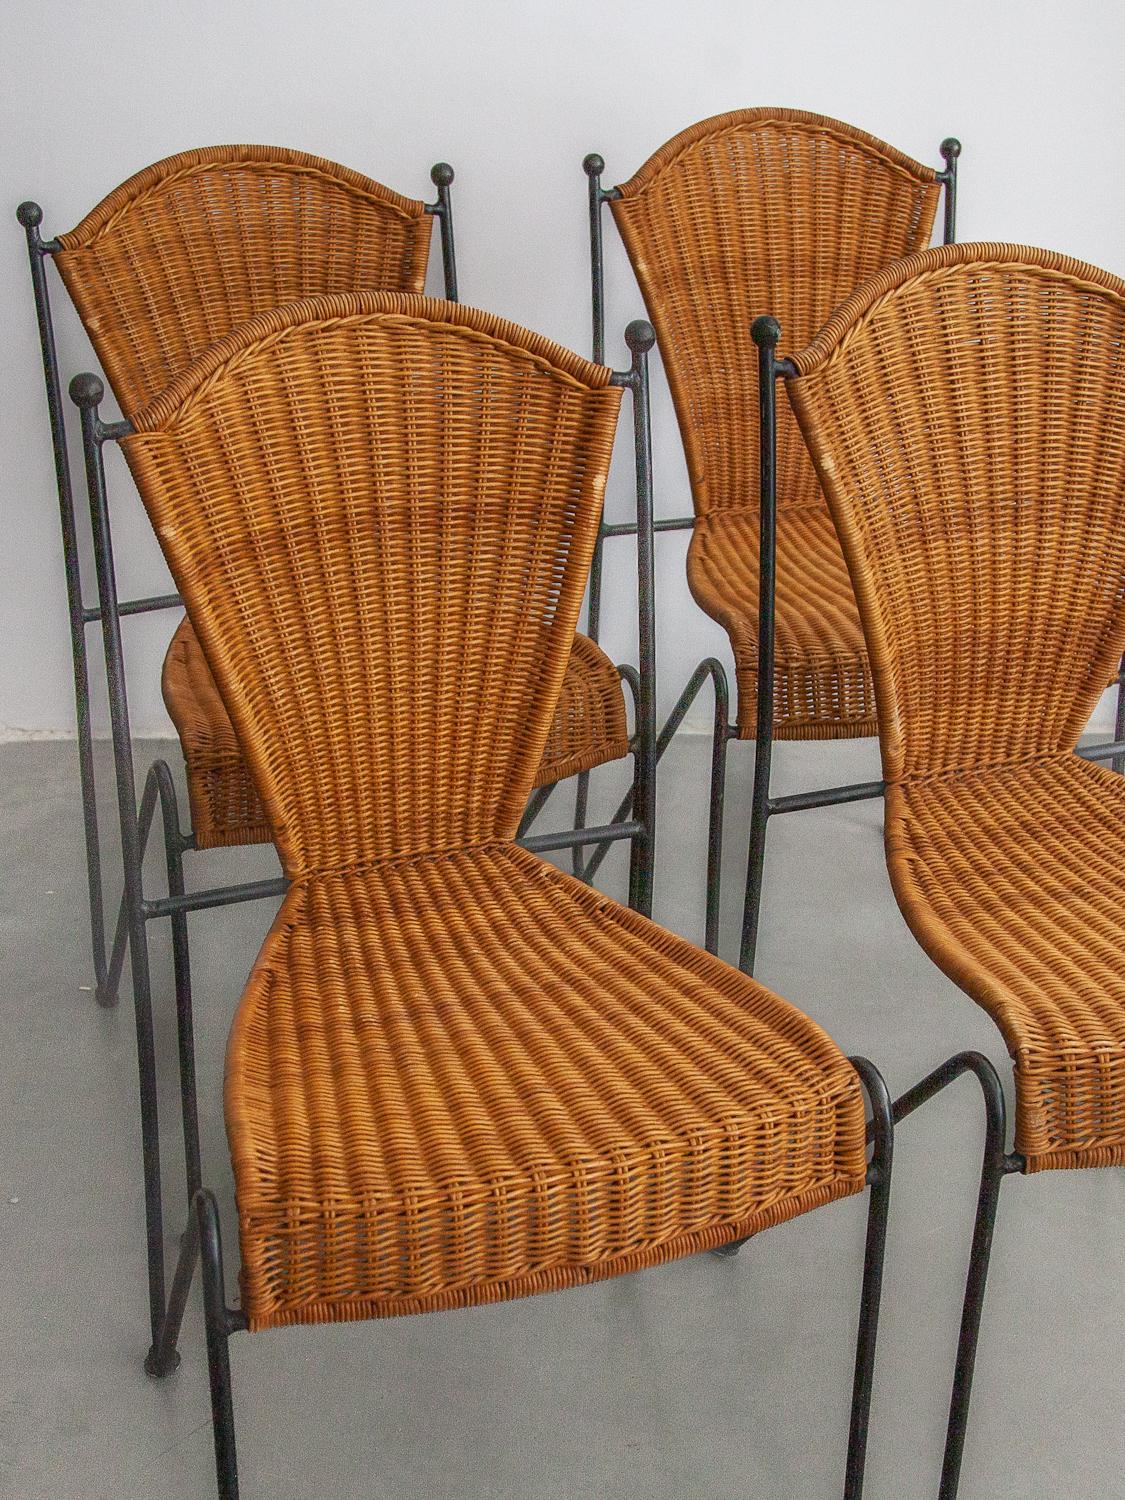 Vintage dining chair set indoor, outdoor dining chairs by designer Pipsan Saarinen Swanson for Ficks Reed. Sculptural black iron frames with gold ball ends. Woven rattan seats. Set of six chairs, two whith arm-rests. Dimensions: No armrests: 44W x